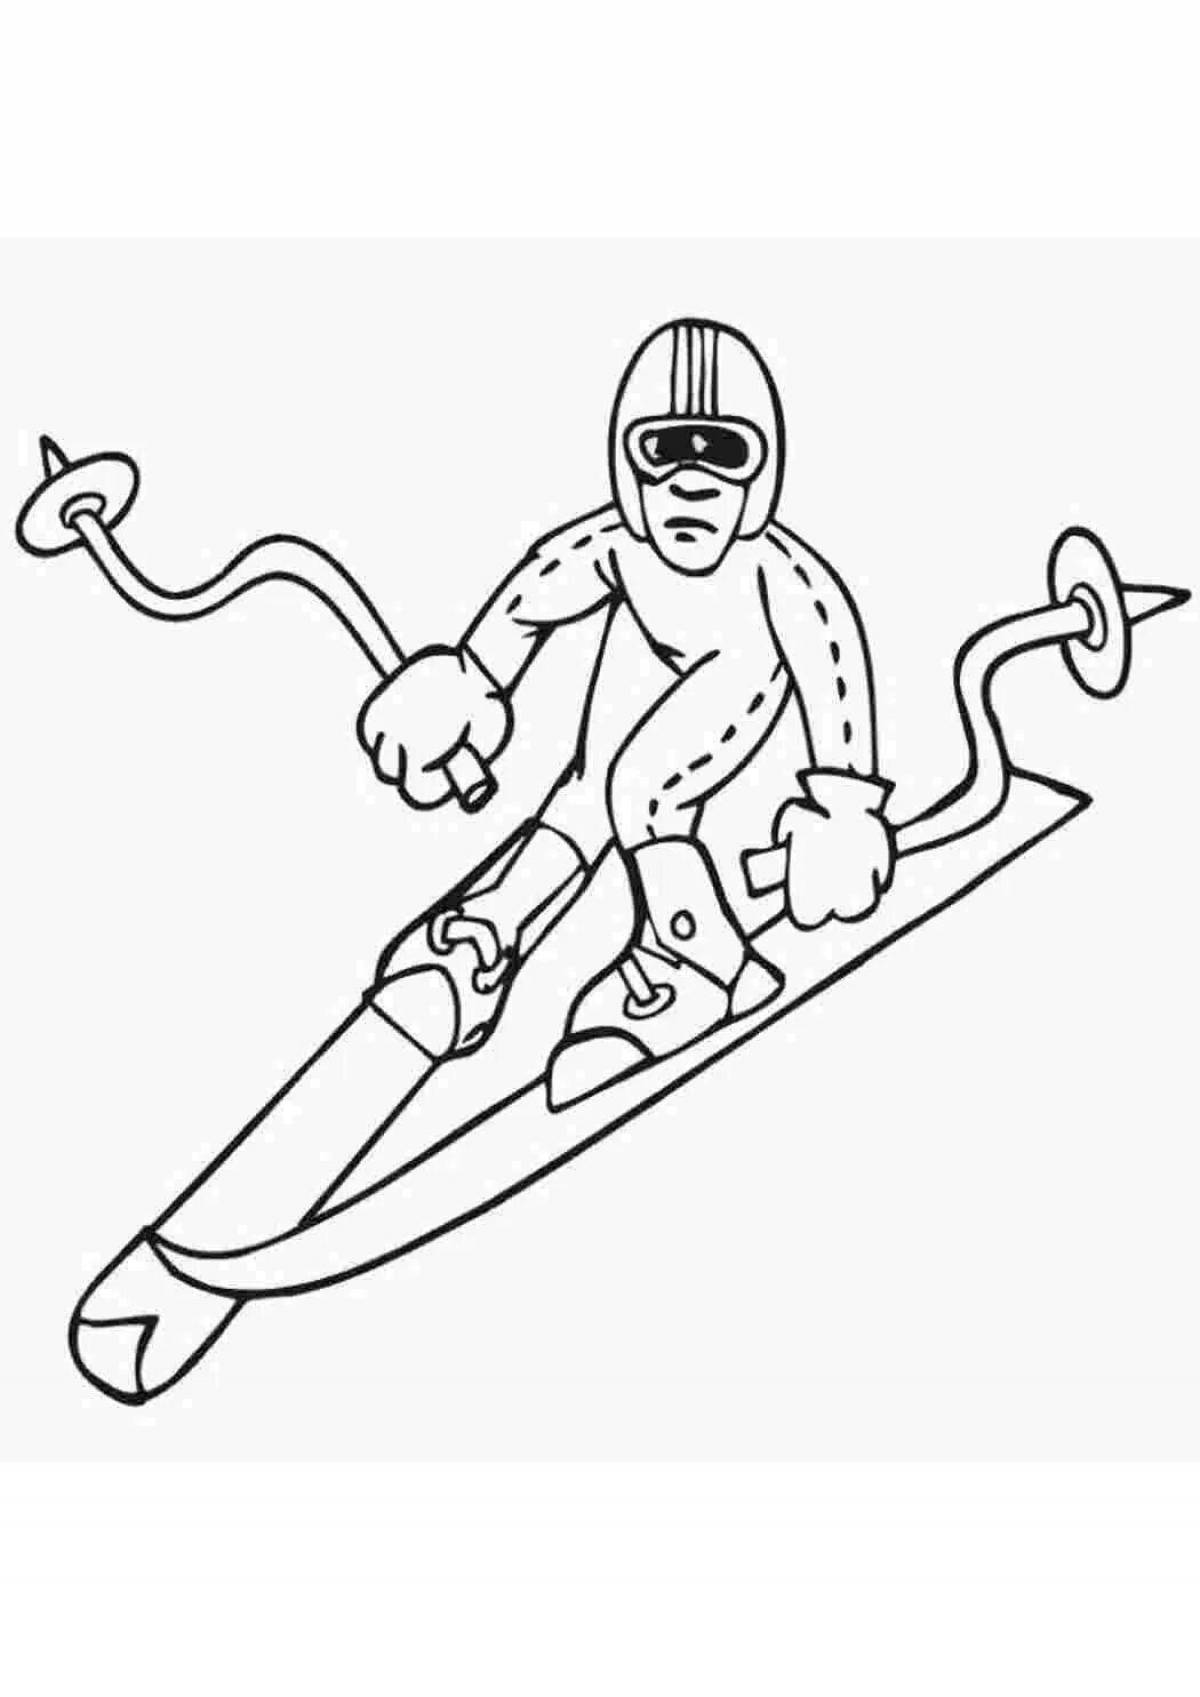 Colouring for kids winter sports